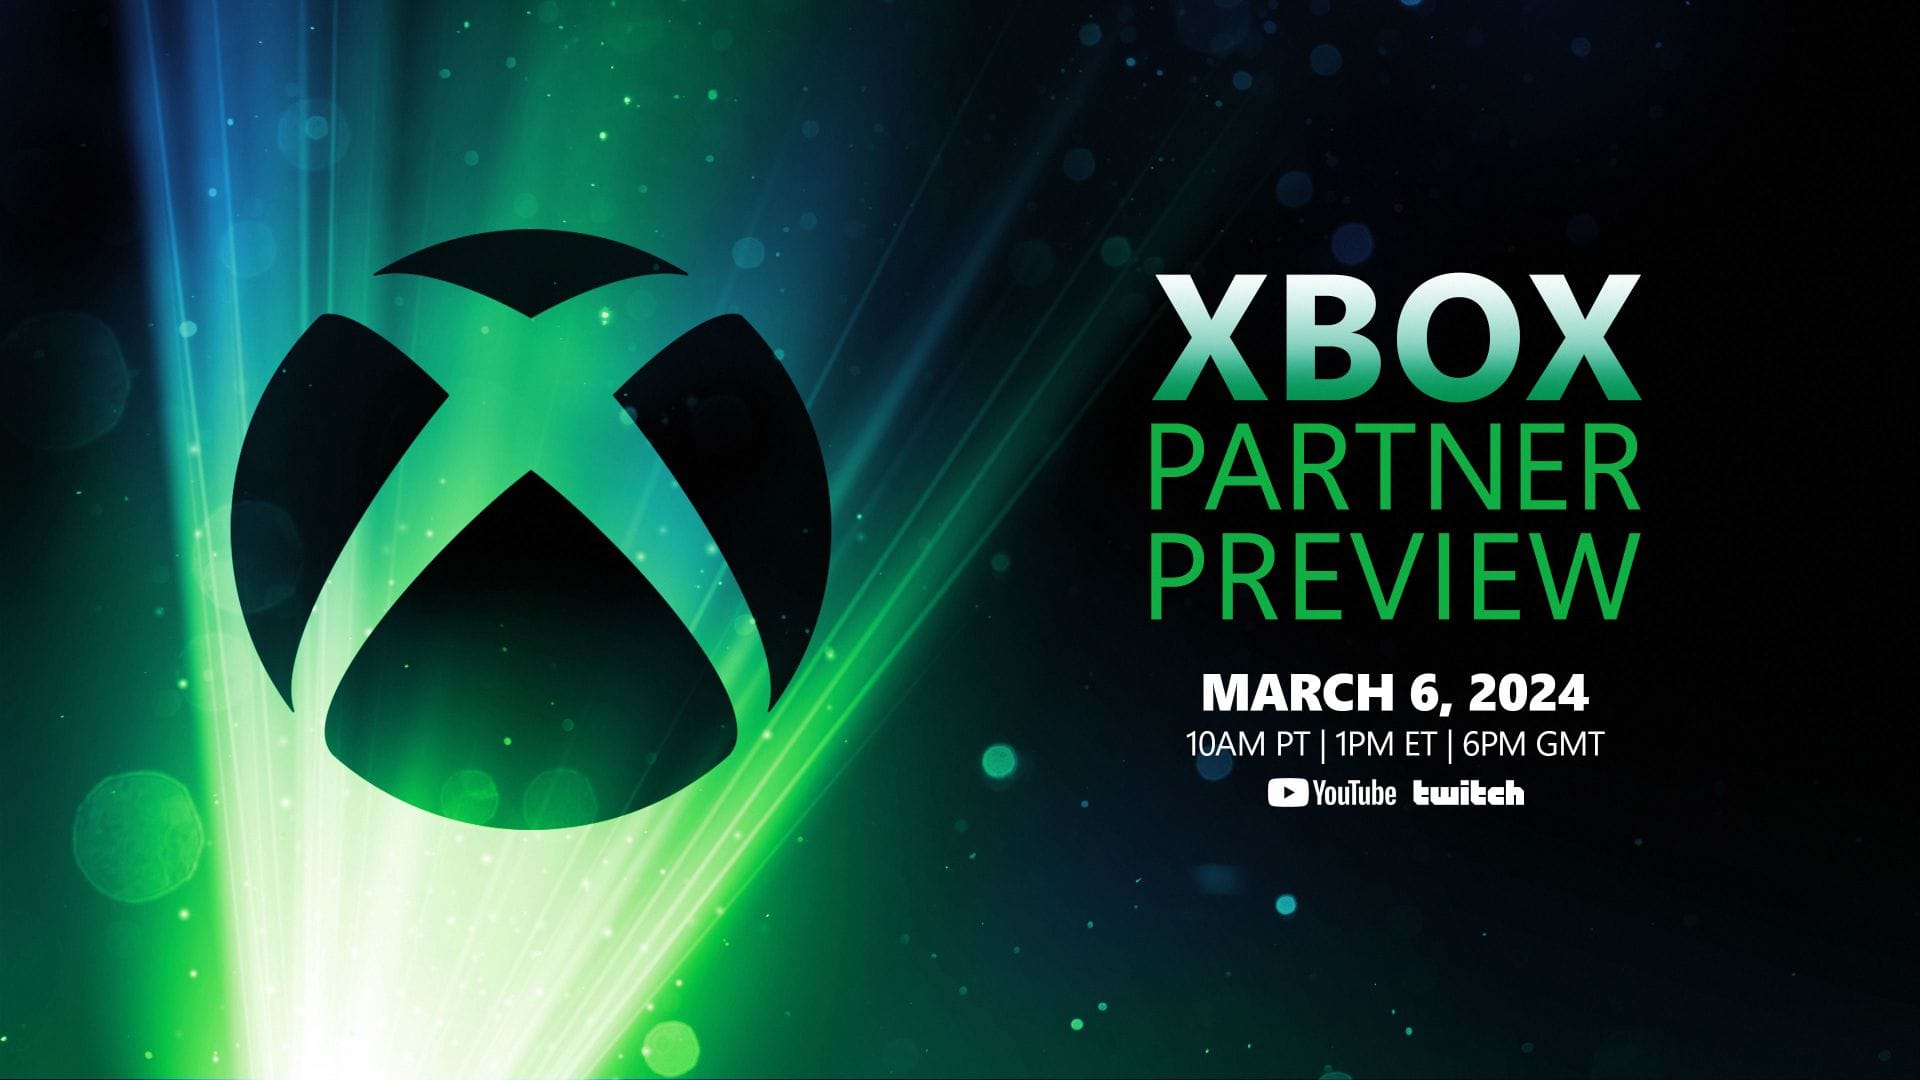 Xbox Partner Preview on March 6